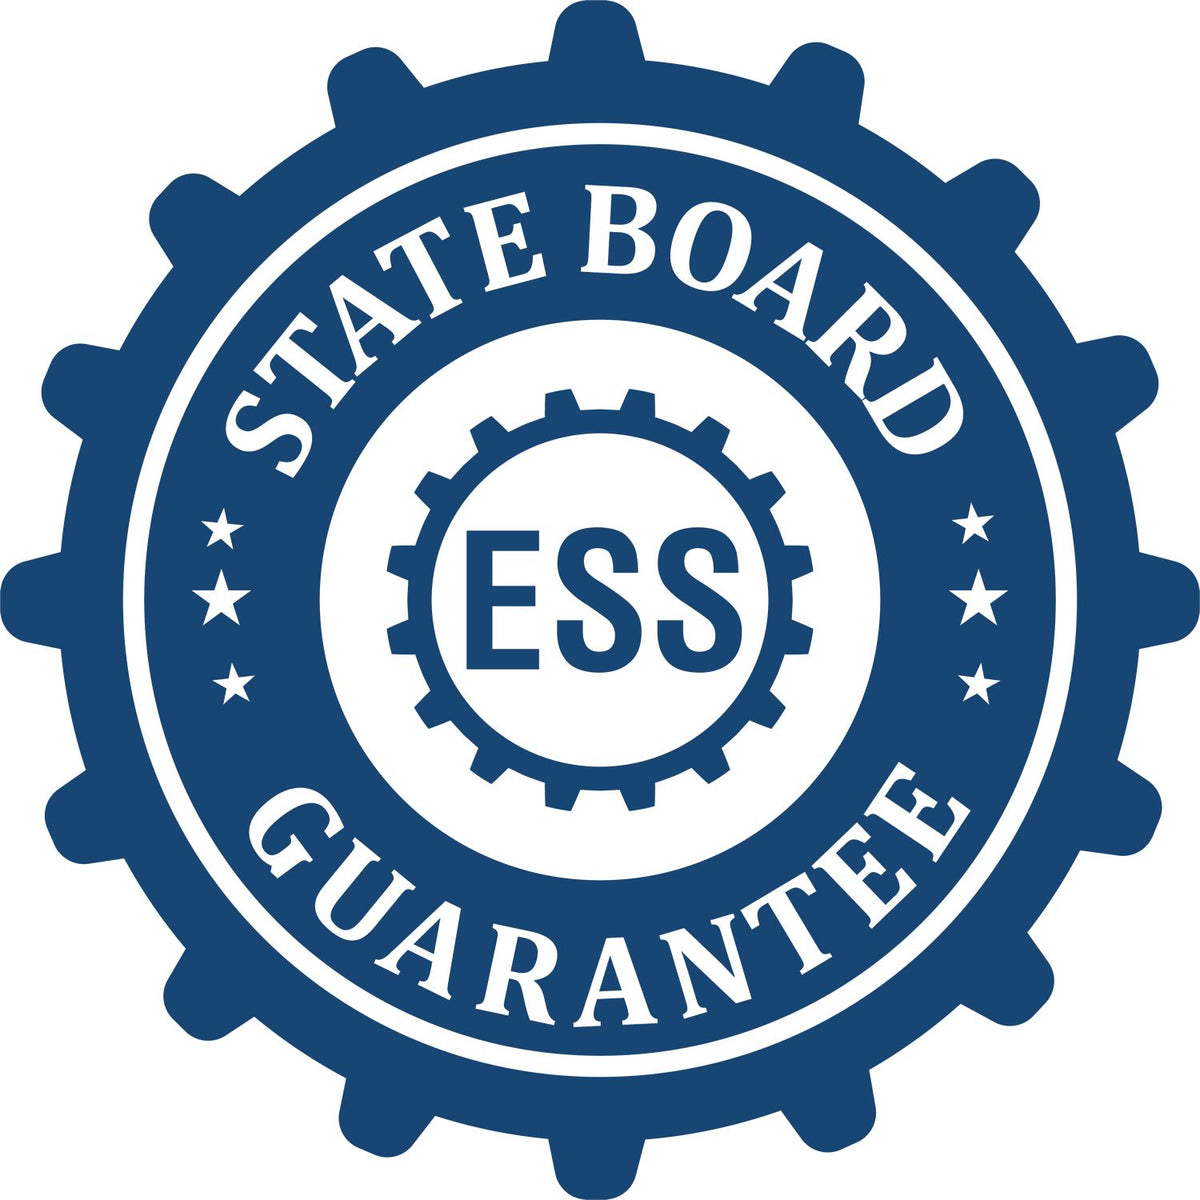 An emblem in a gear shape illustrating a state board guarantee for the Gift Missouri Architect Seal